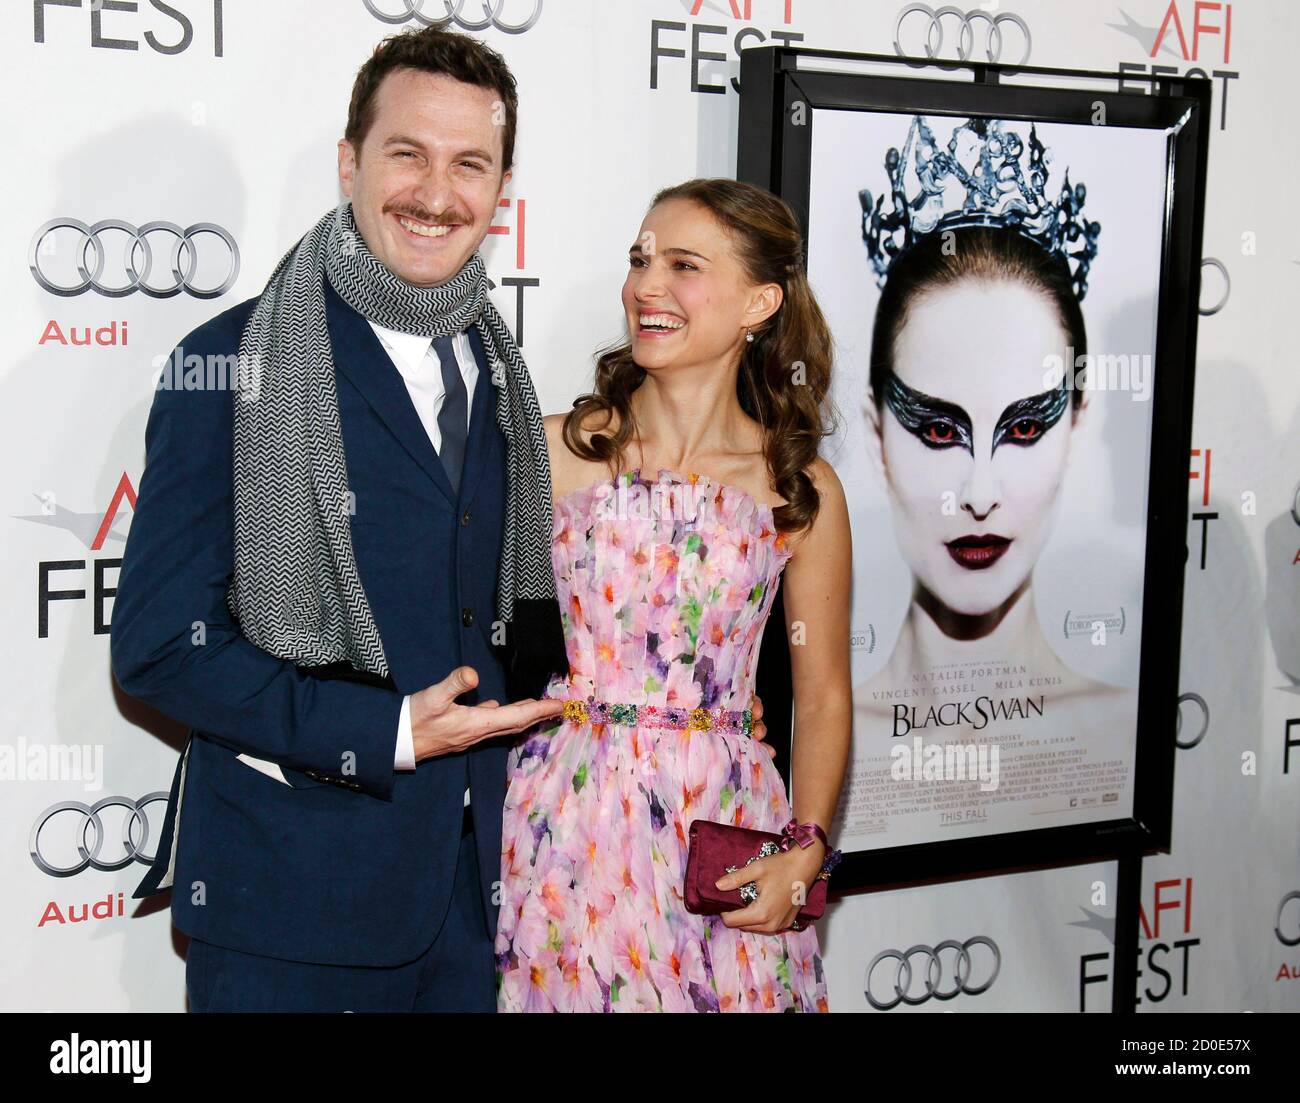 Director Darren Aronofsky (L) and cast member Natalie Portman pose together  before a screening of the film "Black Swan" at the closing night gala of  AFI Fest 2010 in Hollywood, California November